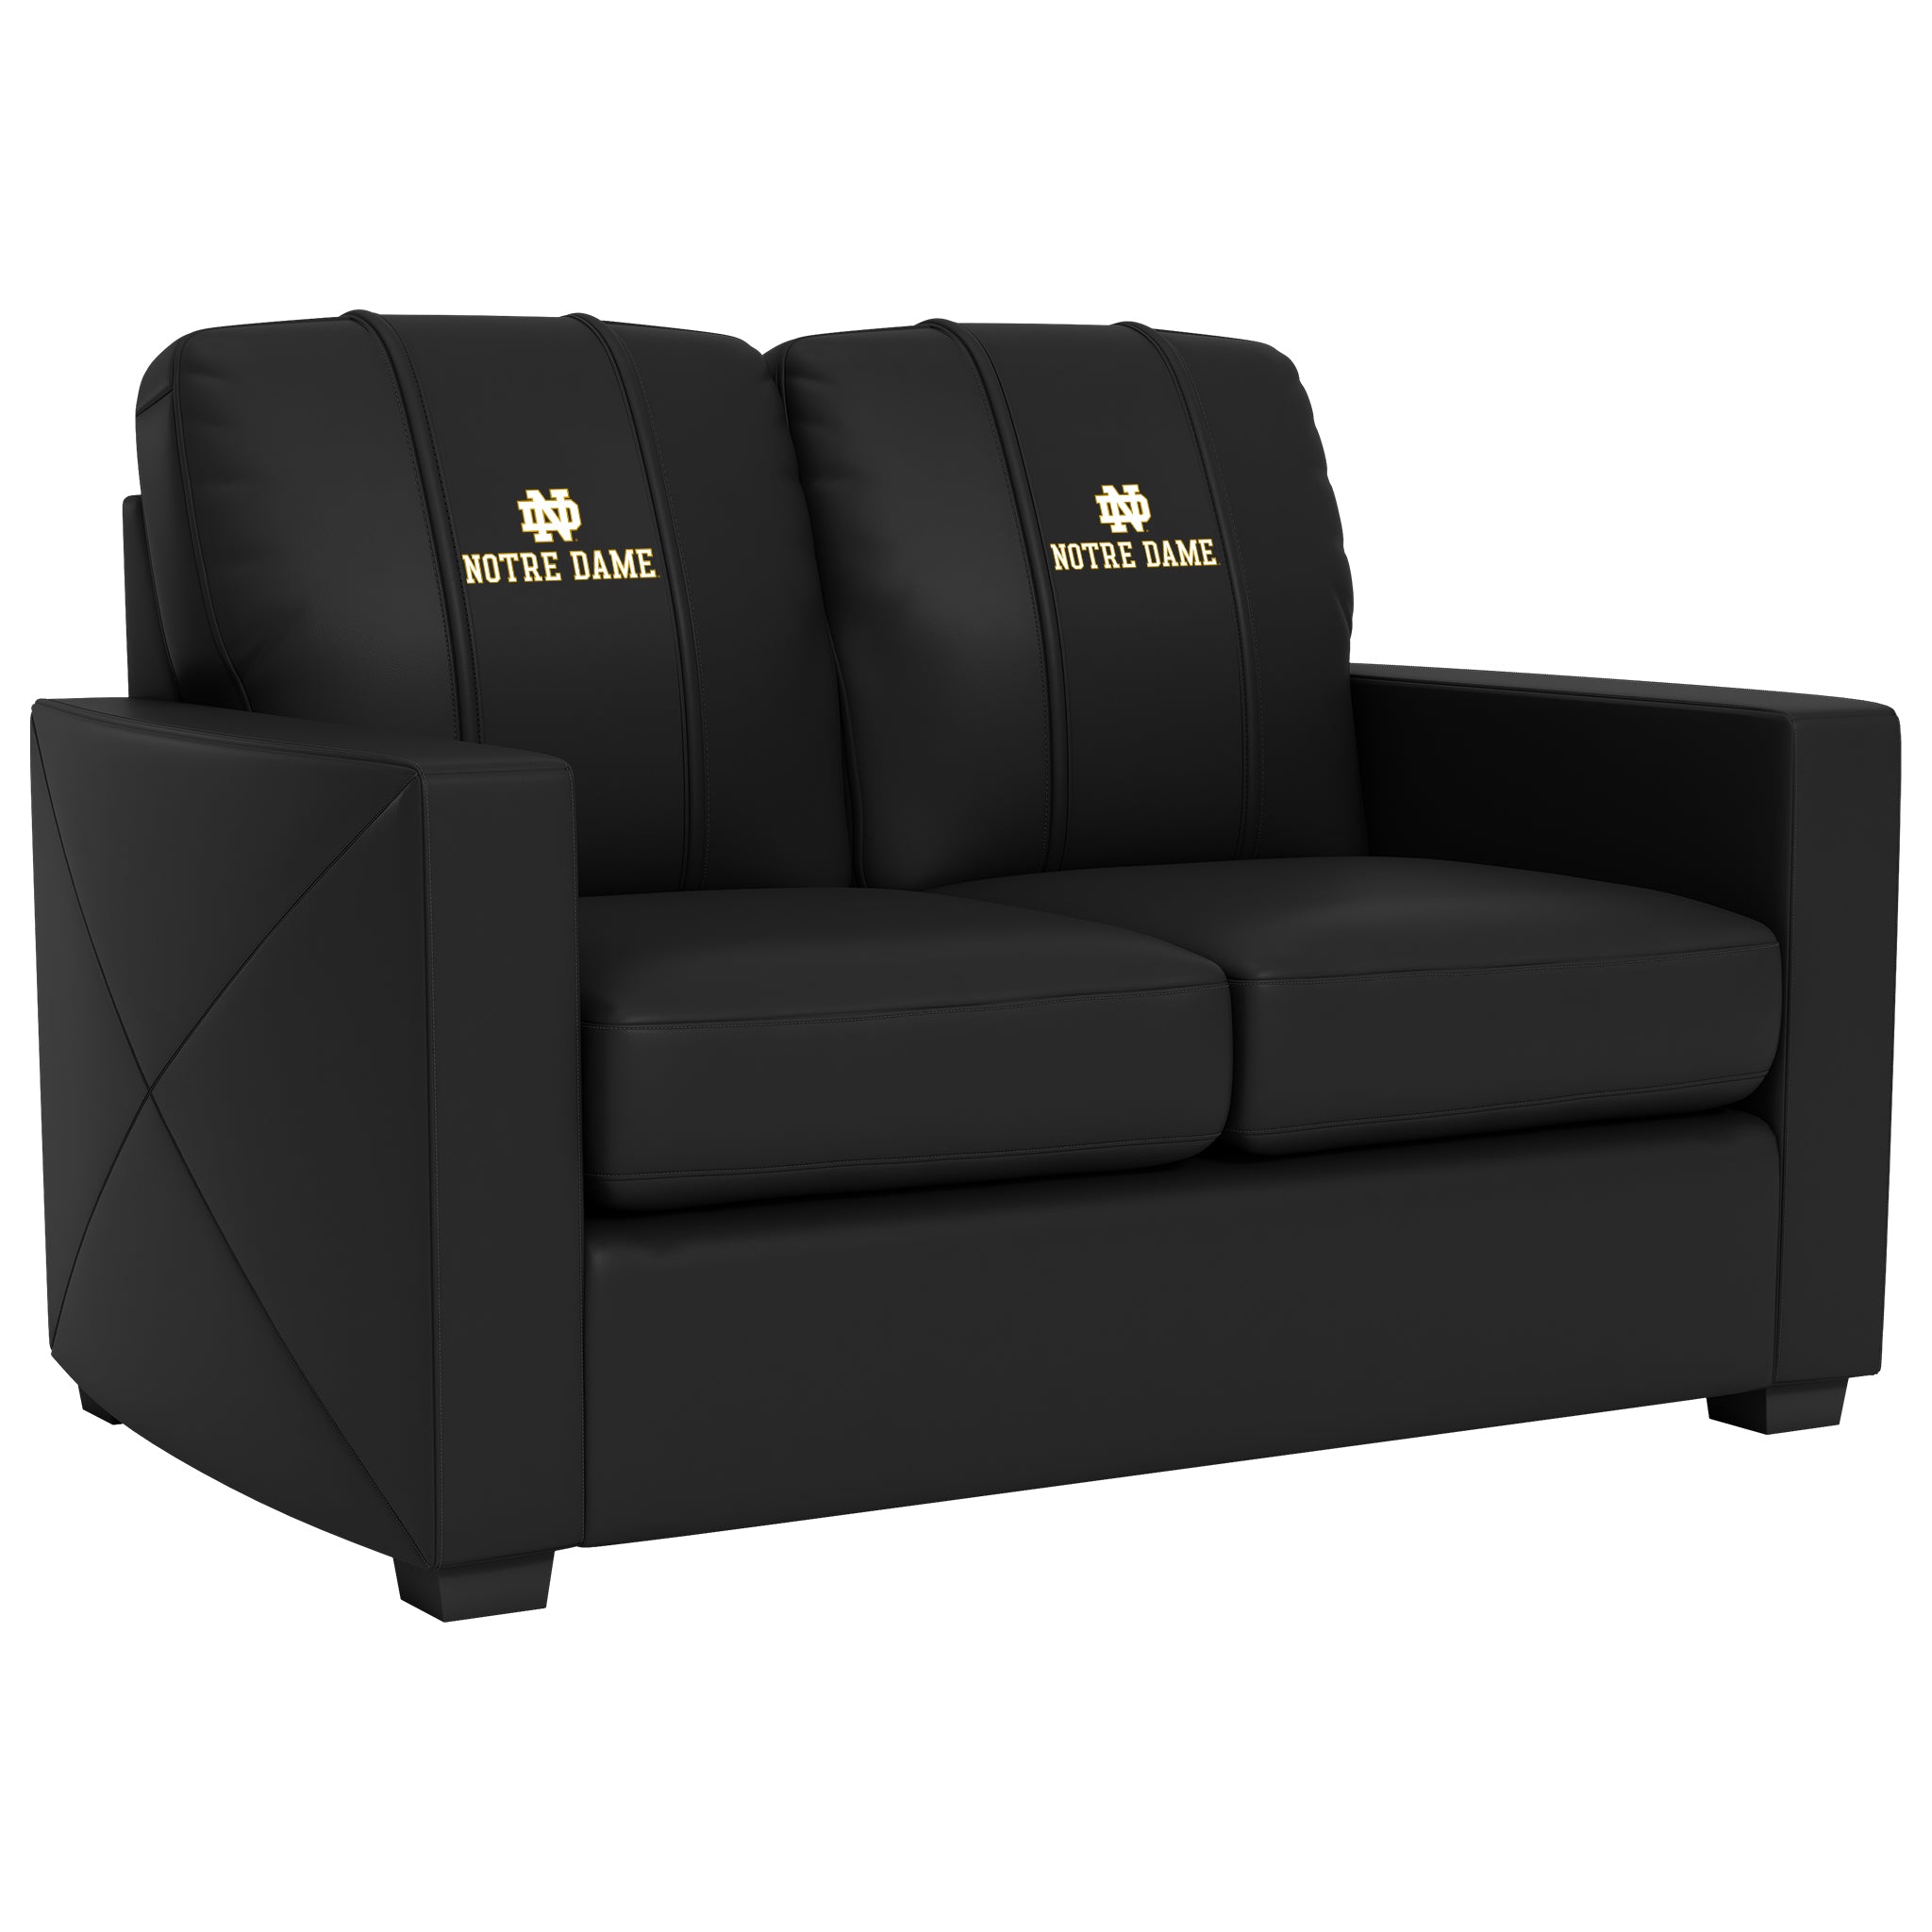 Notre Dame  Silver Loveseat with Notre Dame Alternate Logo